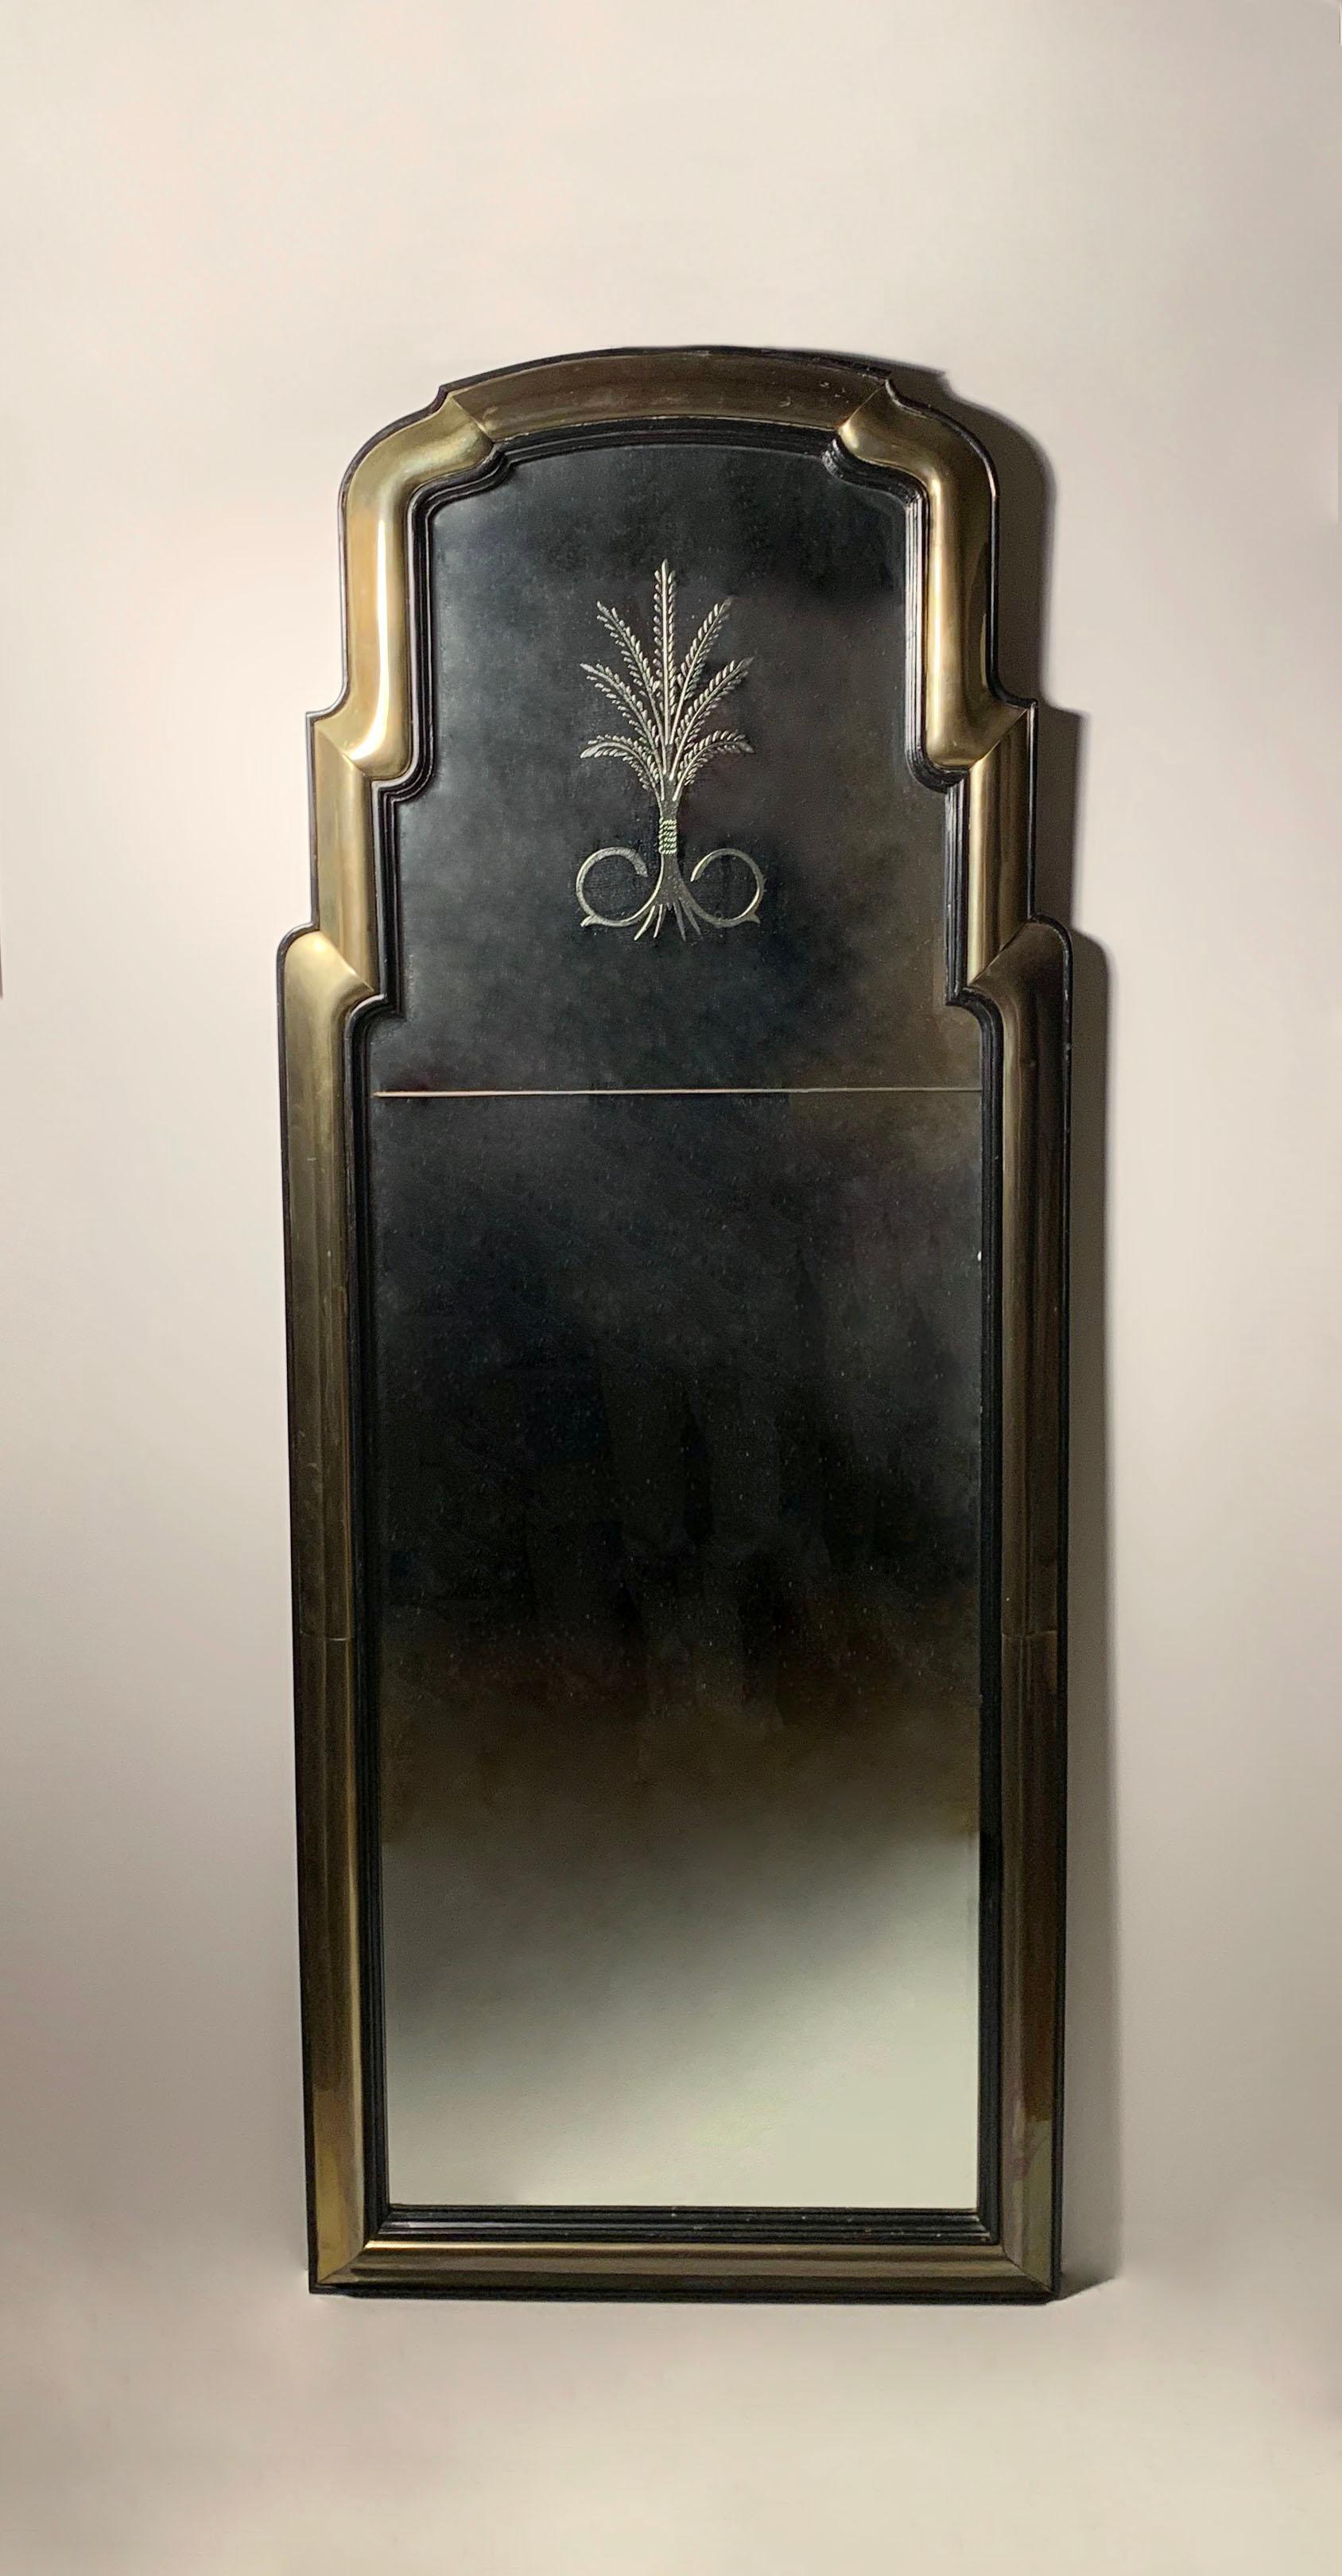 Dramatic Brass and Wood Waterfall Mirror with Etched Plume Design

Uncertain to origin of the mirror. Possibly from Italy or France. Possibly by Mastercraft.  No makers mark on reverse. High quality craftsmanship all around on this mirror.  Some